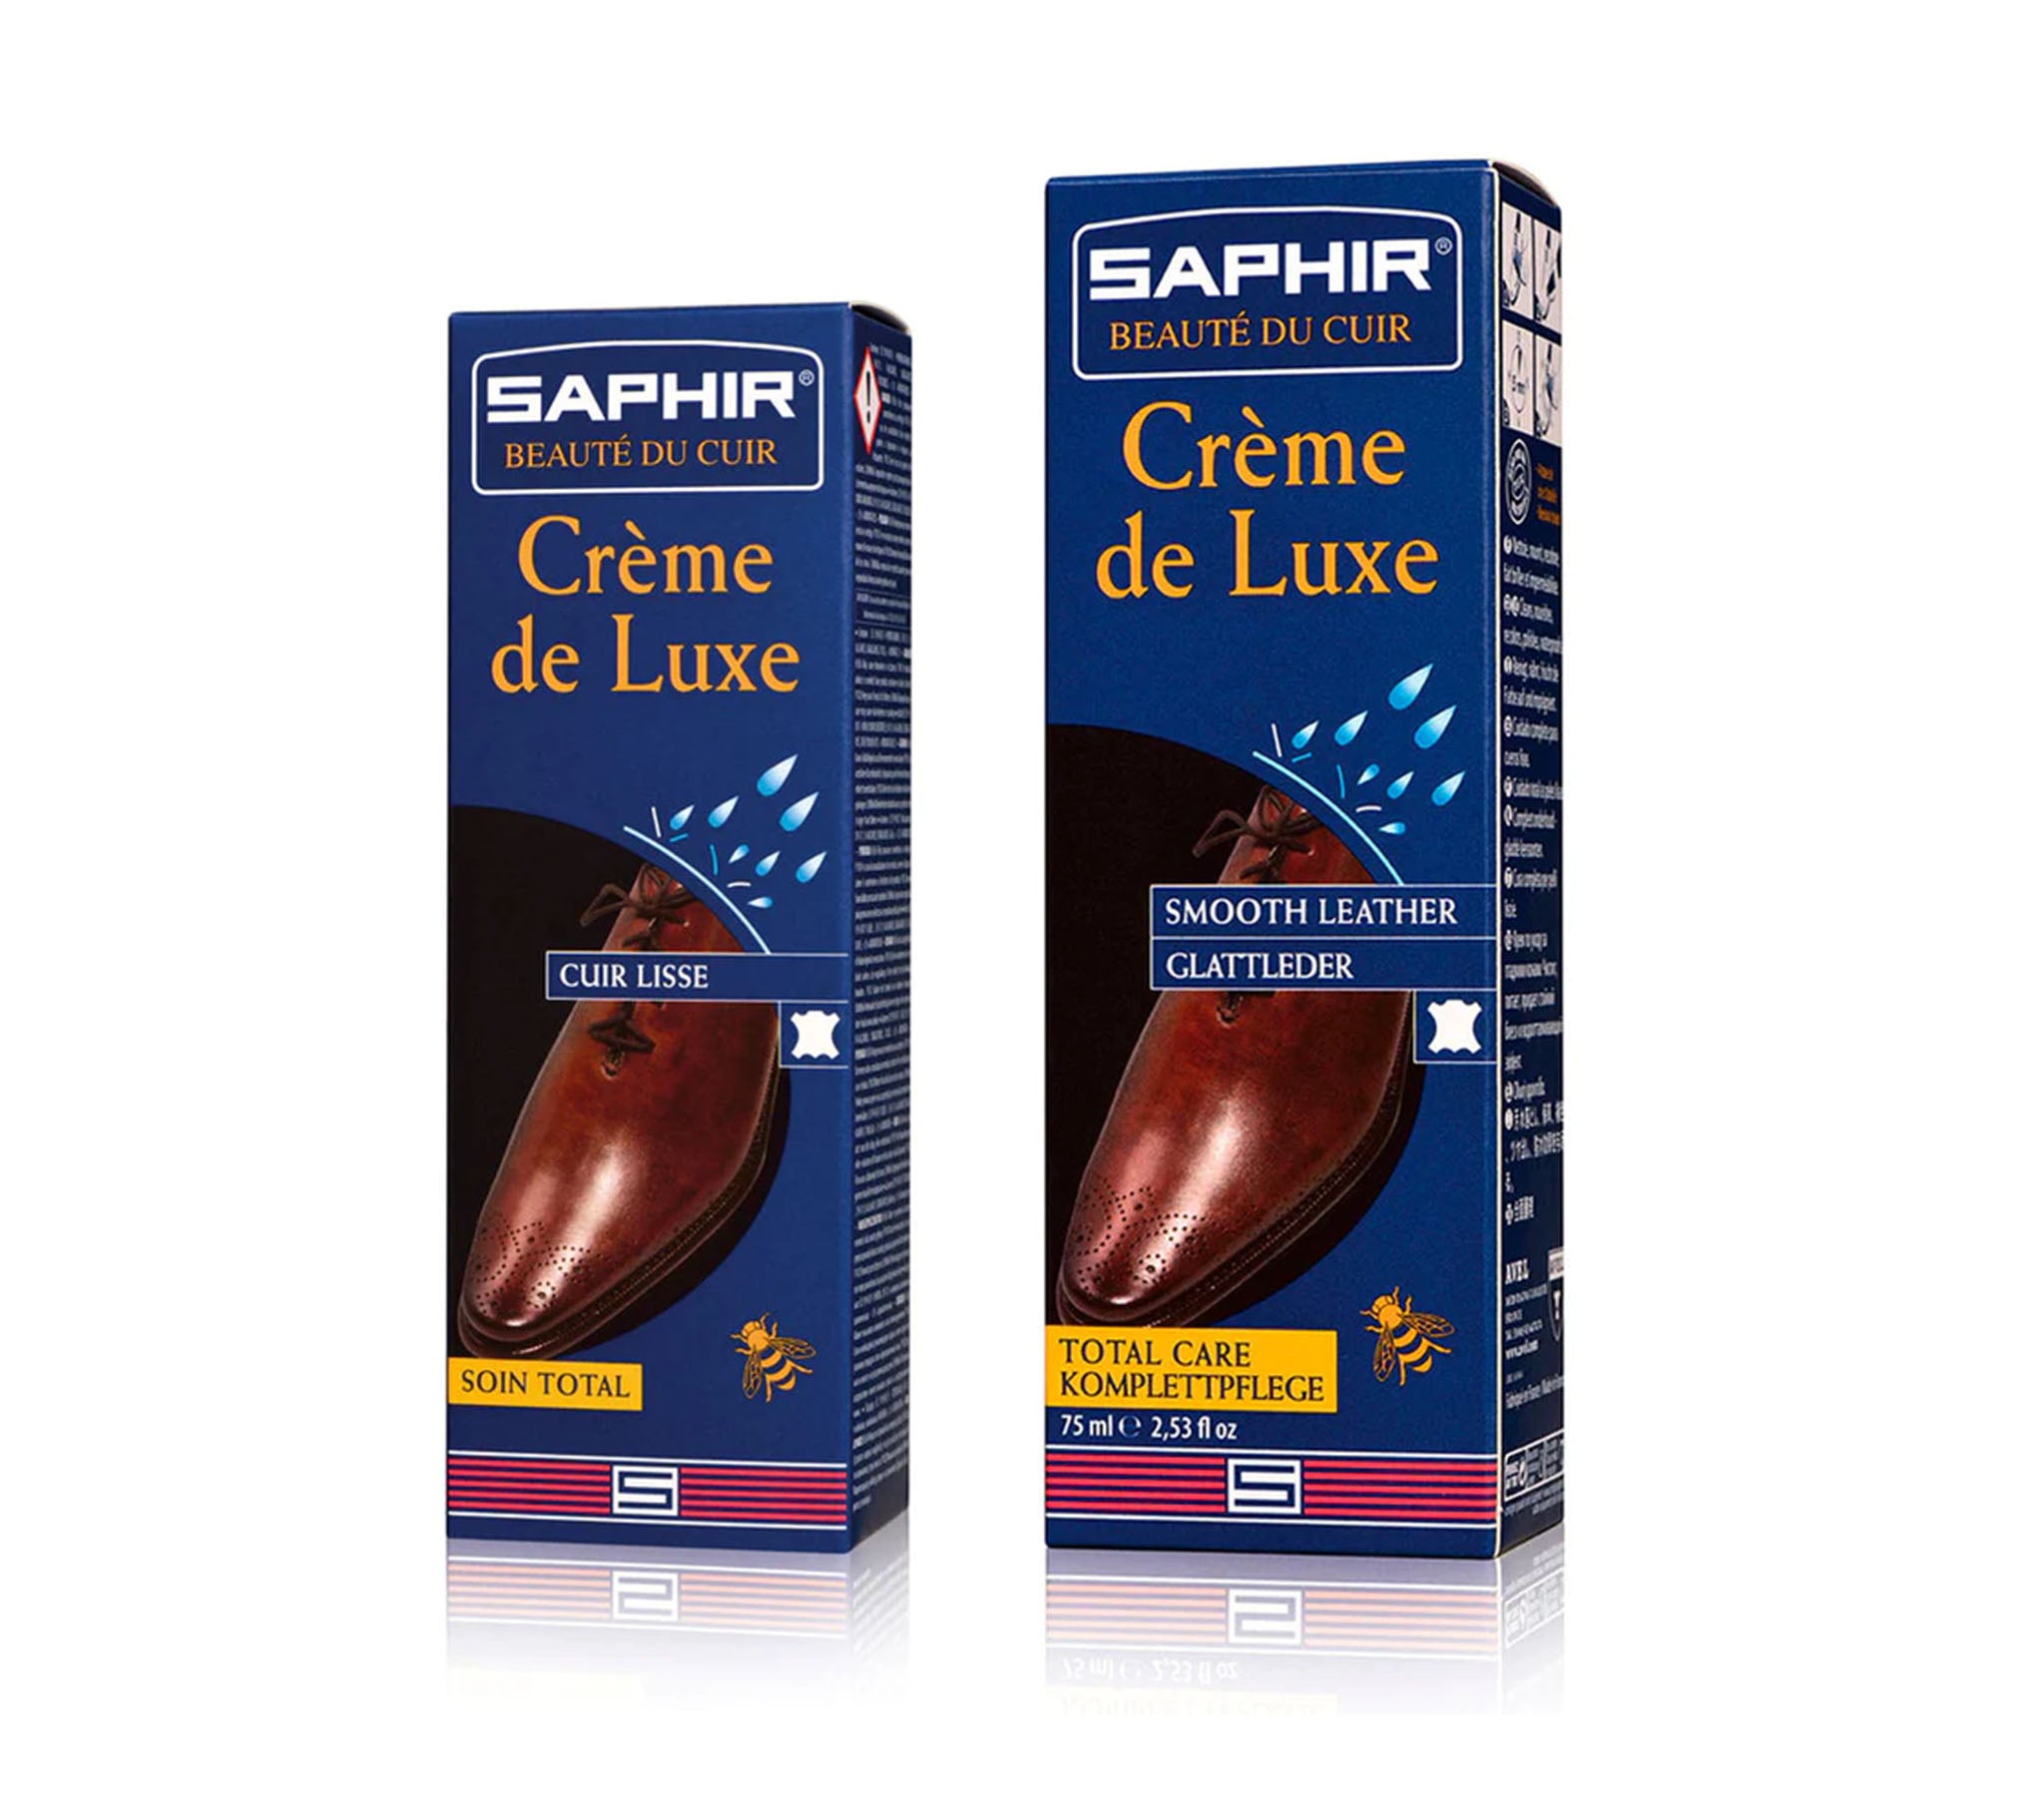 Saphir Juvacuir Recoloring Cream for Leather Goods